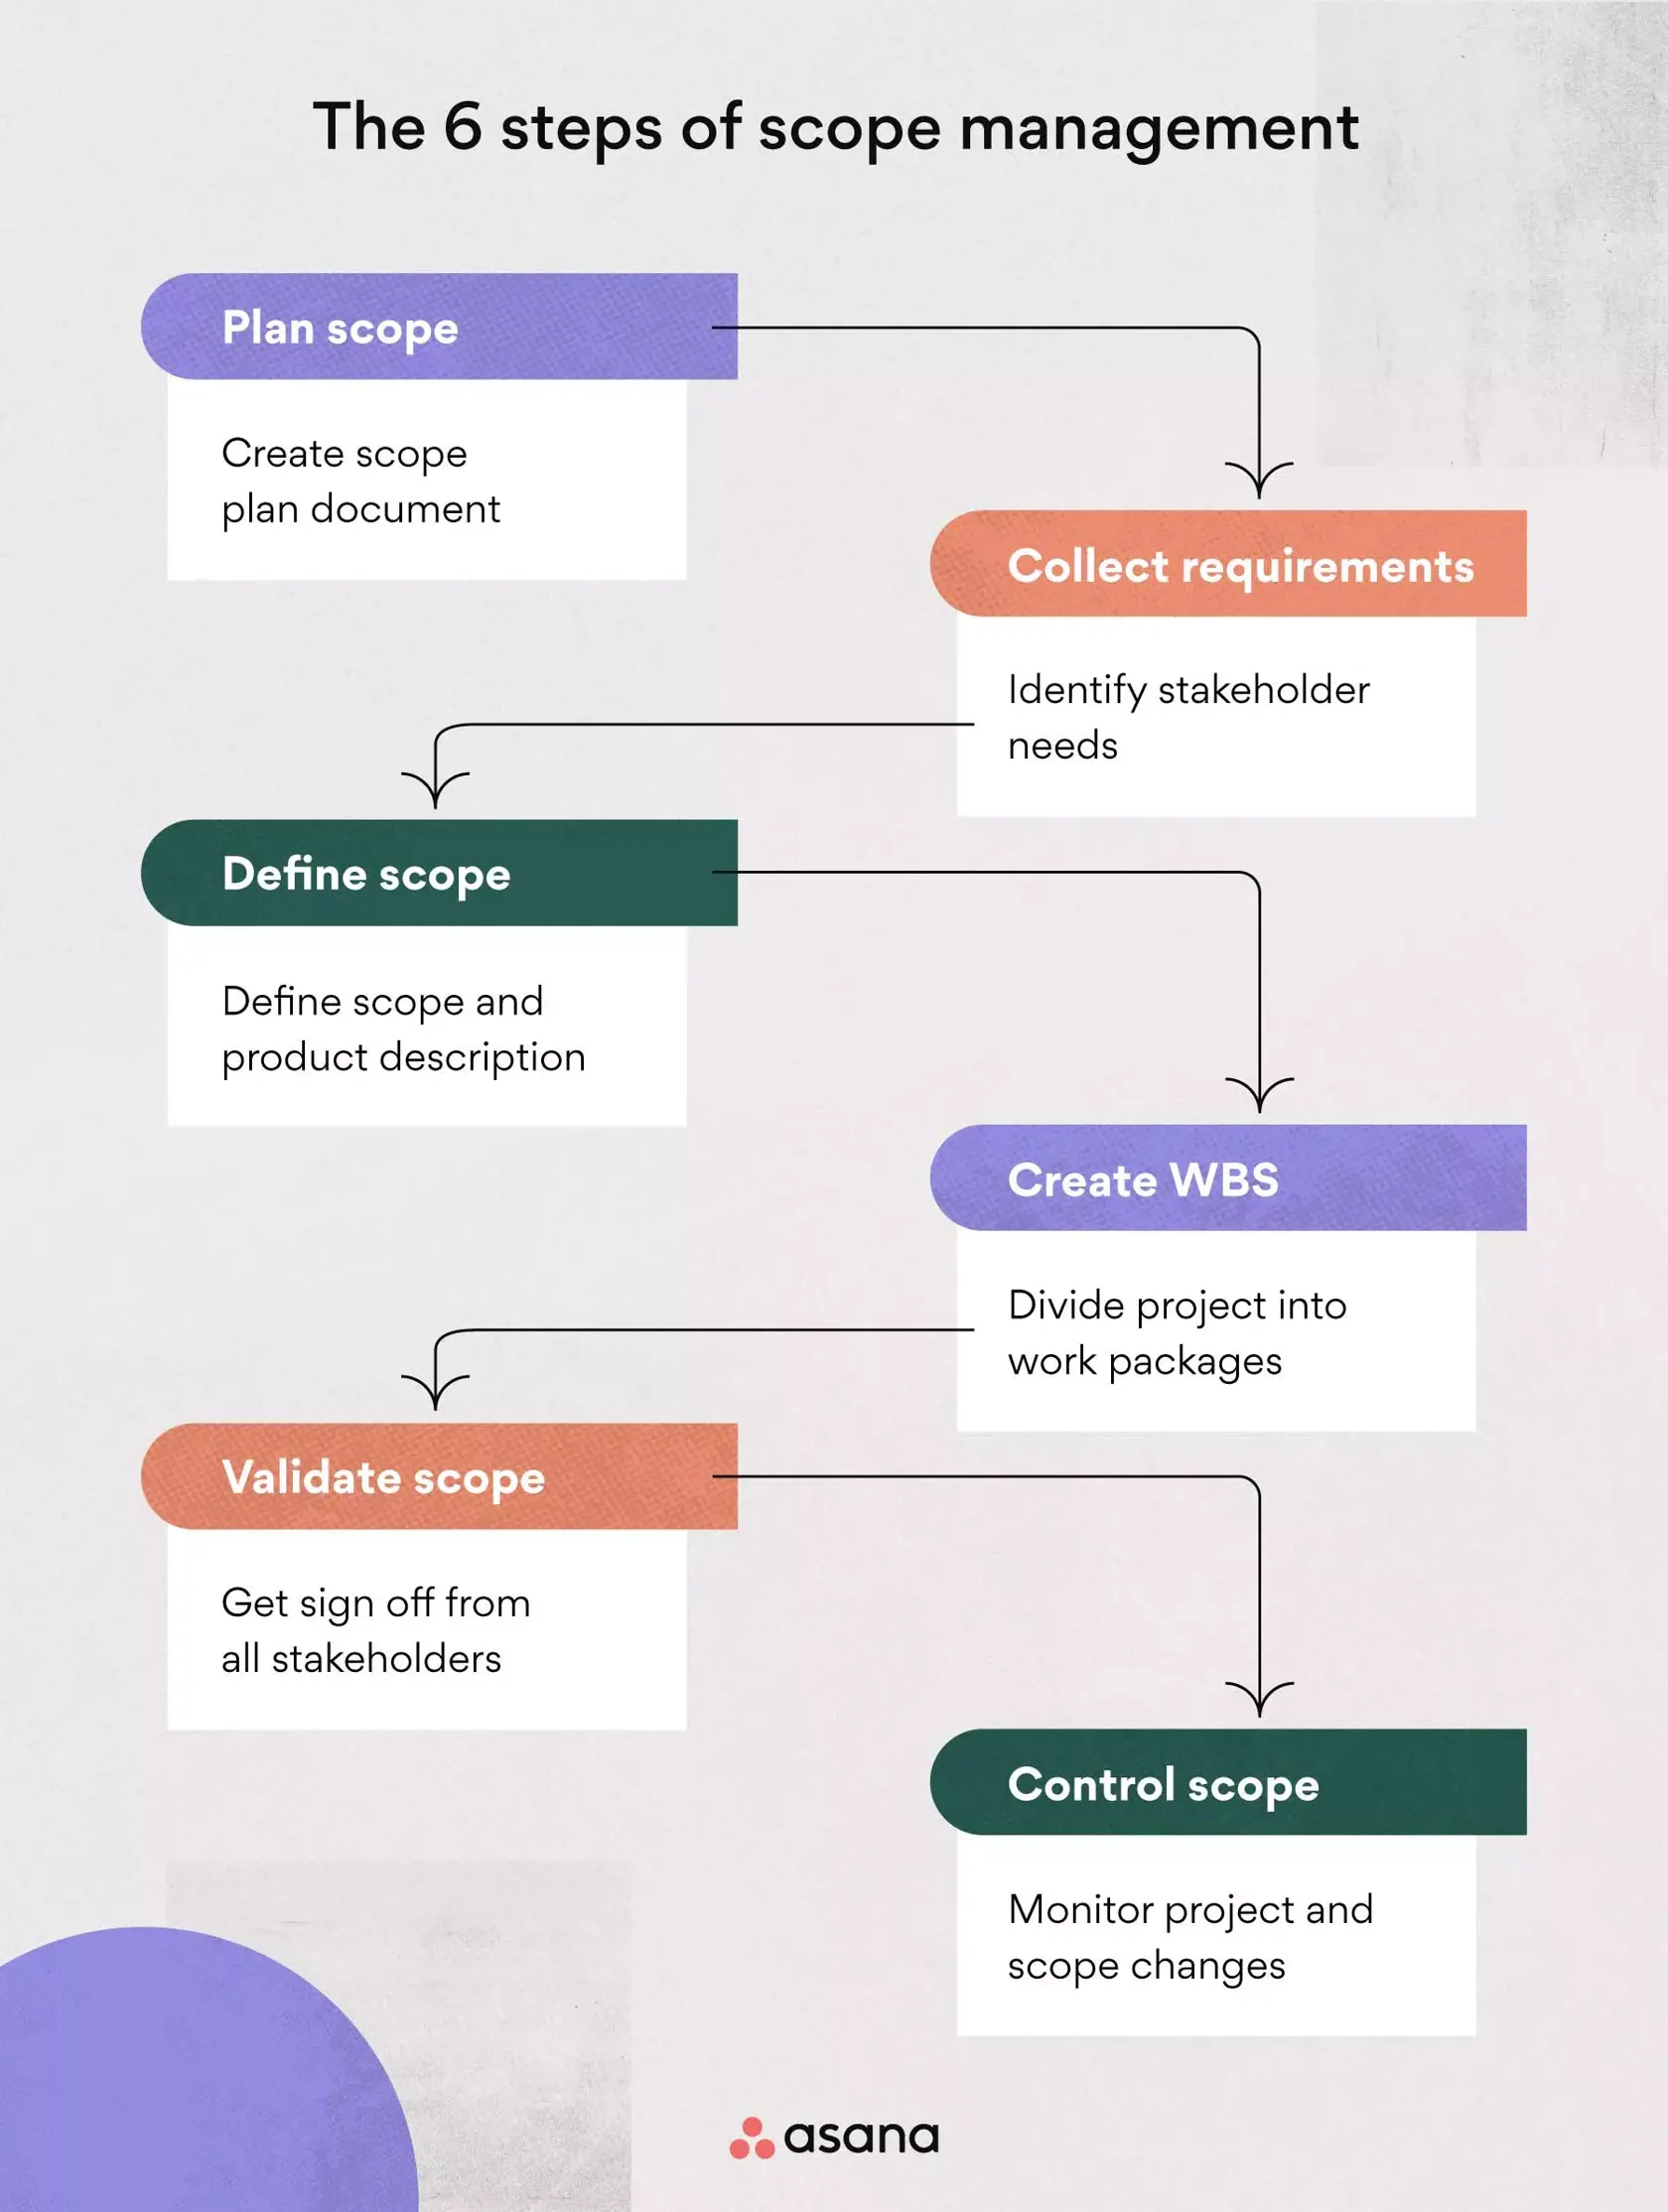 The 6 steps of scope management